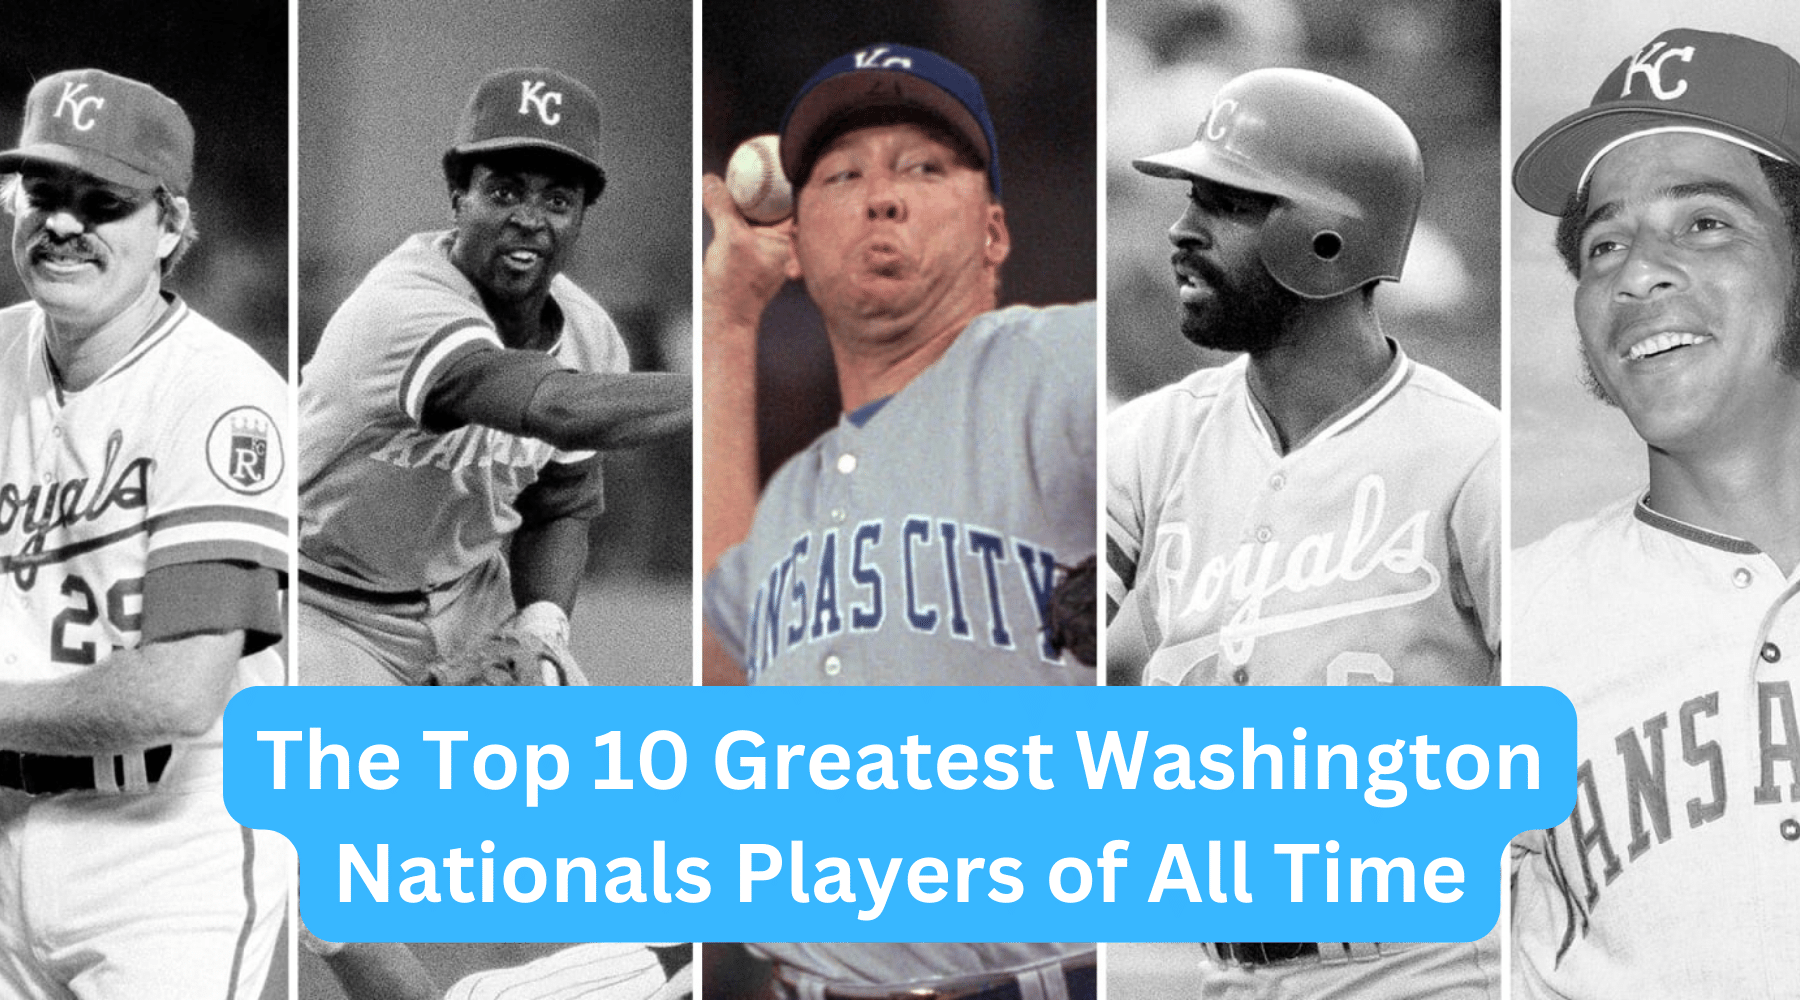 The Top 10 Greatest Kansas City Royals Players of All Time